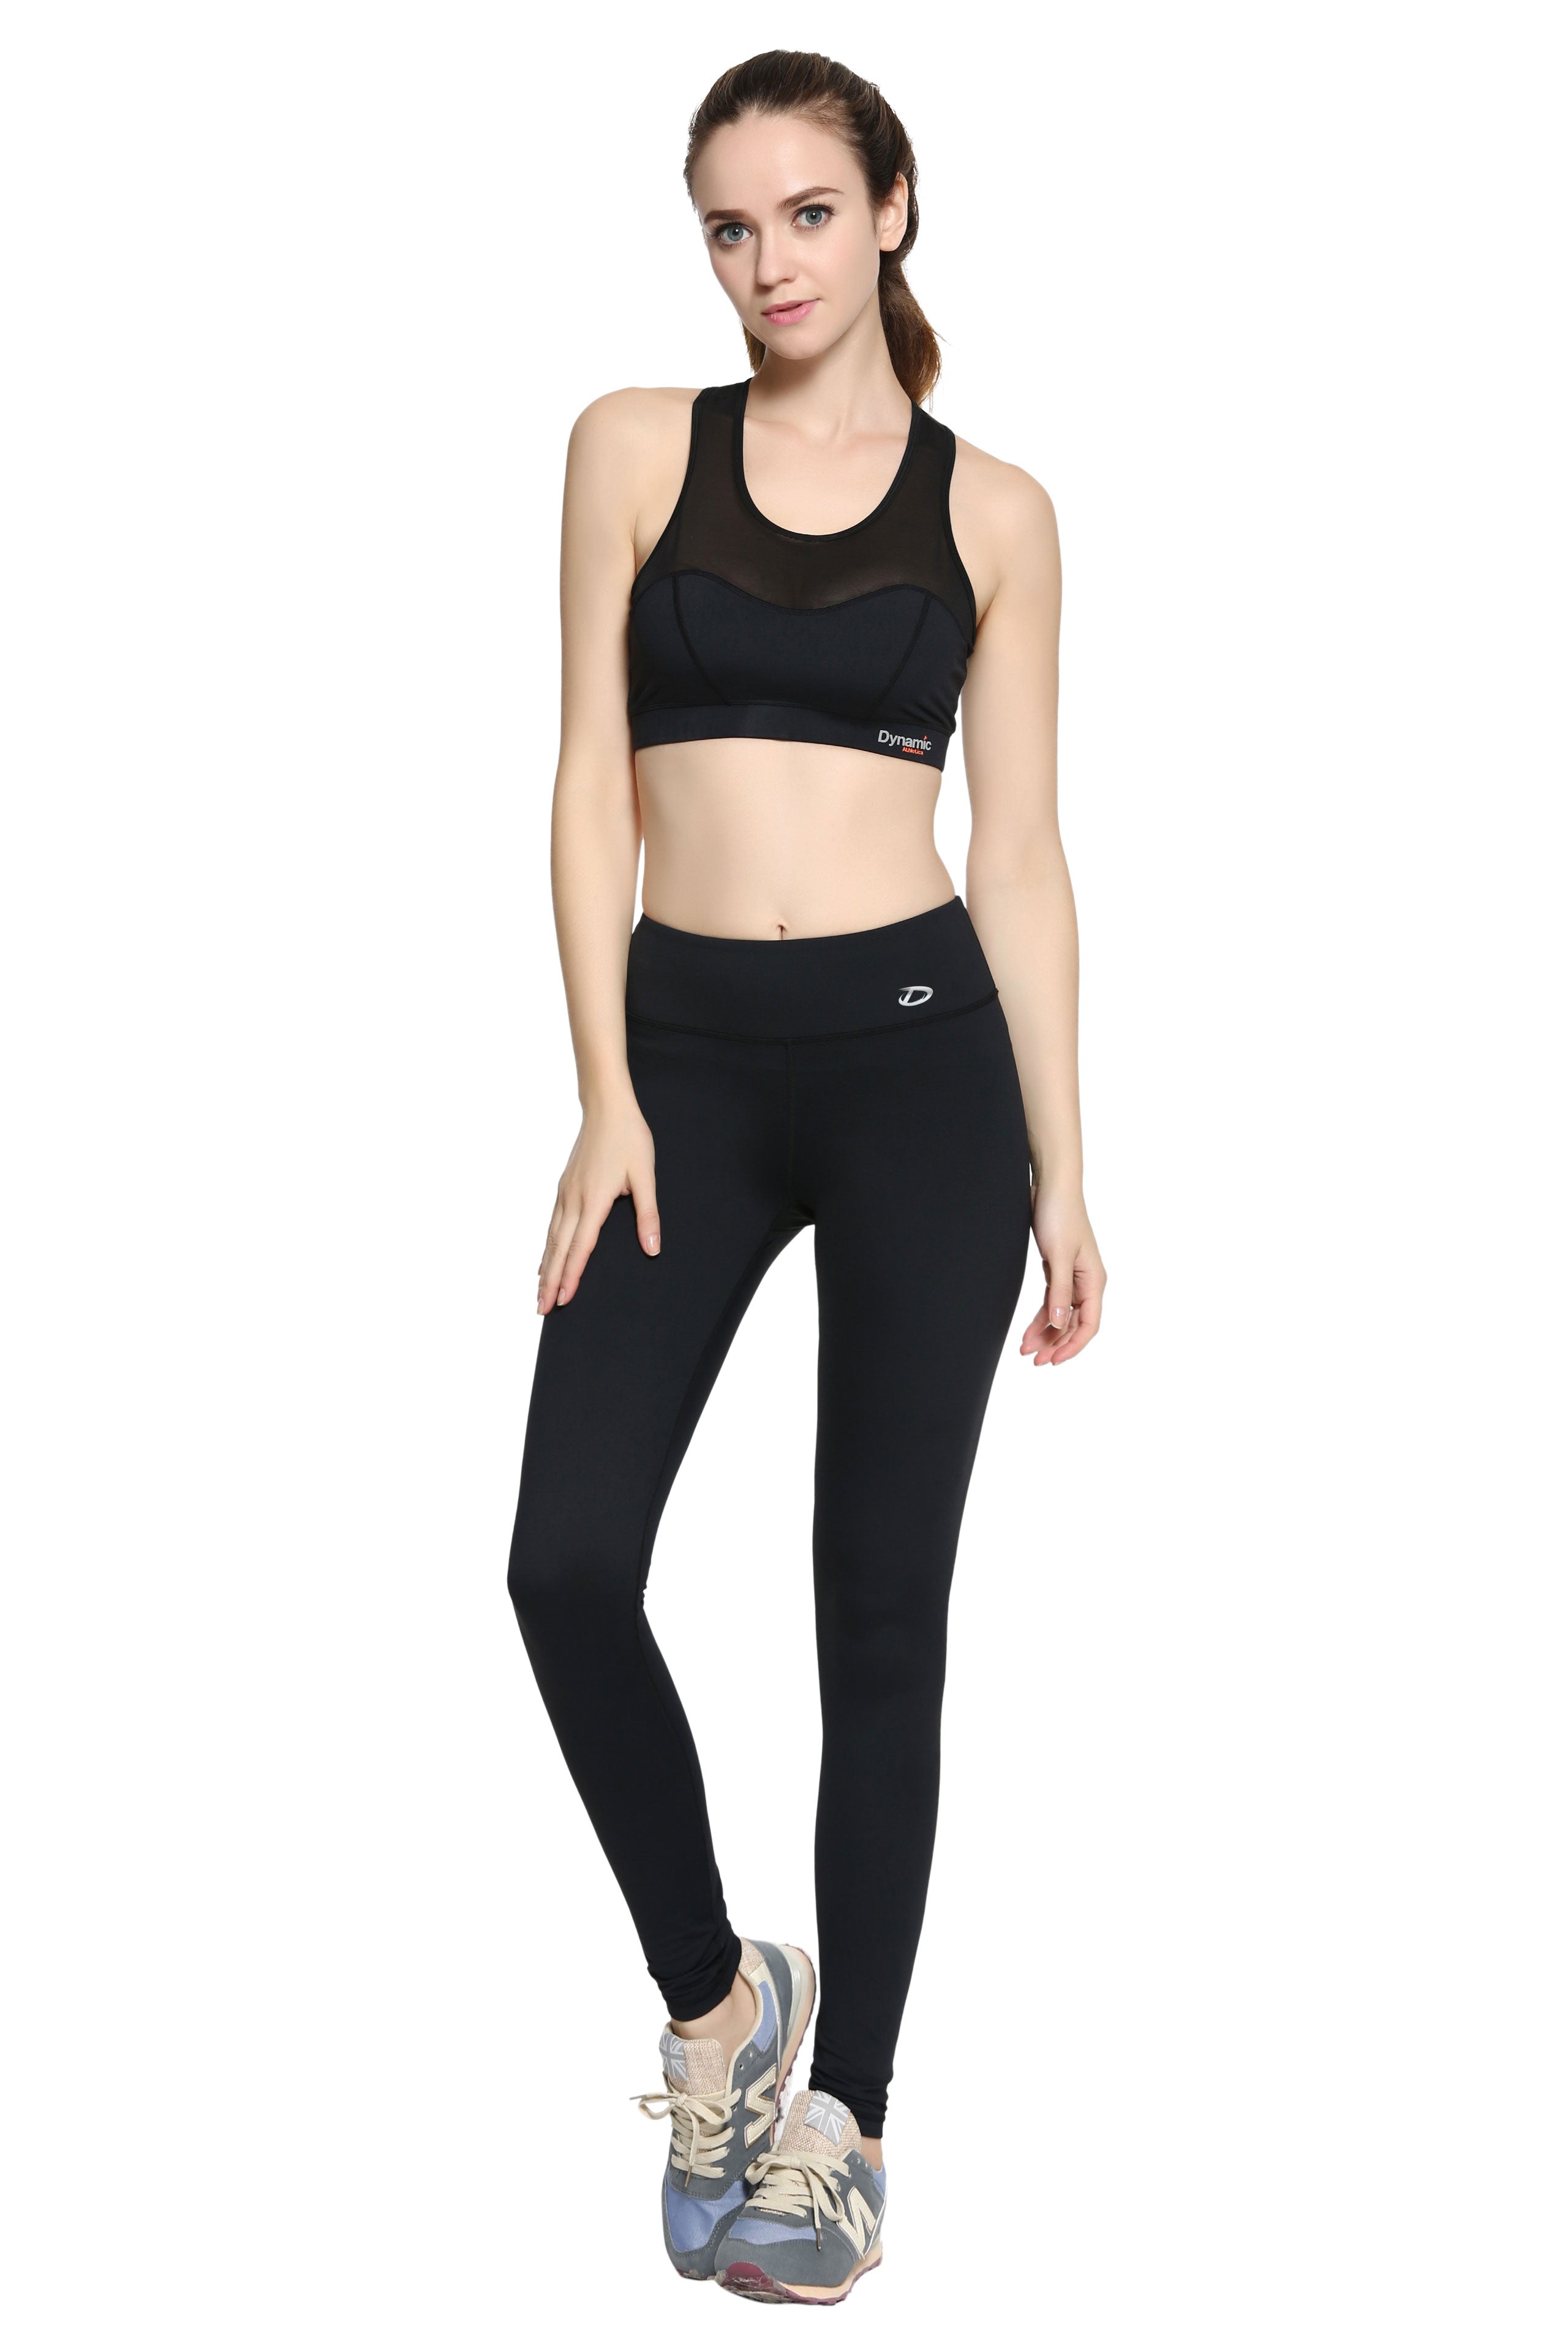 Lined Wine Compression Leggings, Workout Wear For Women